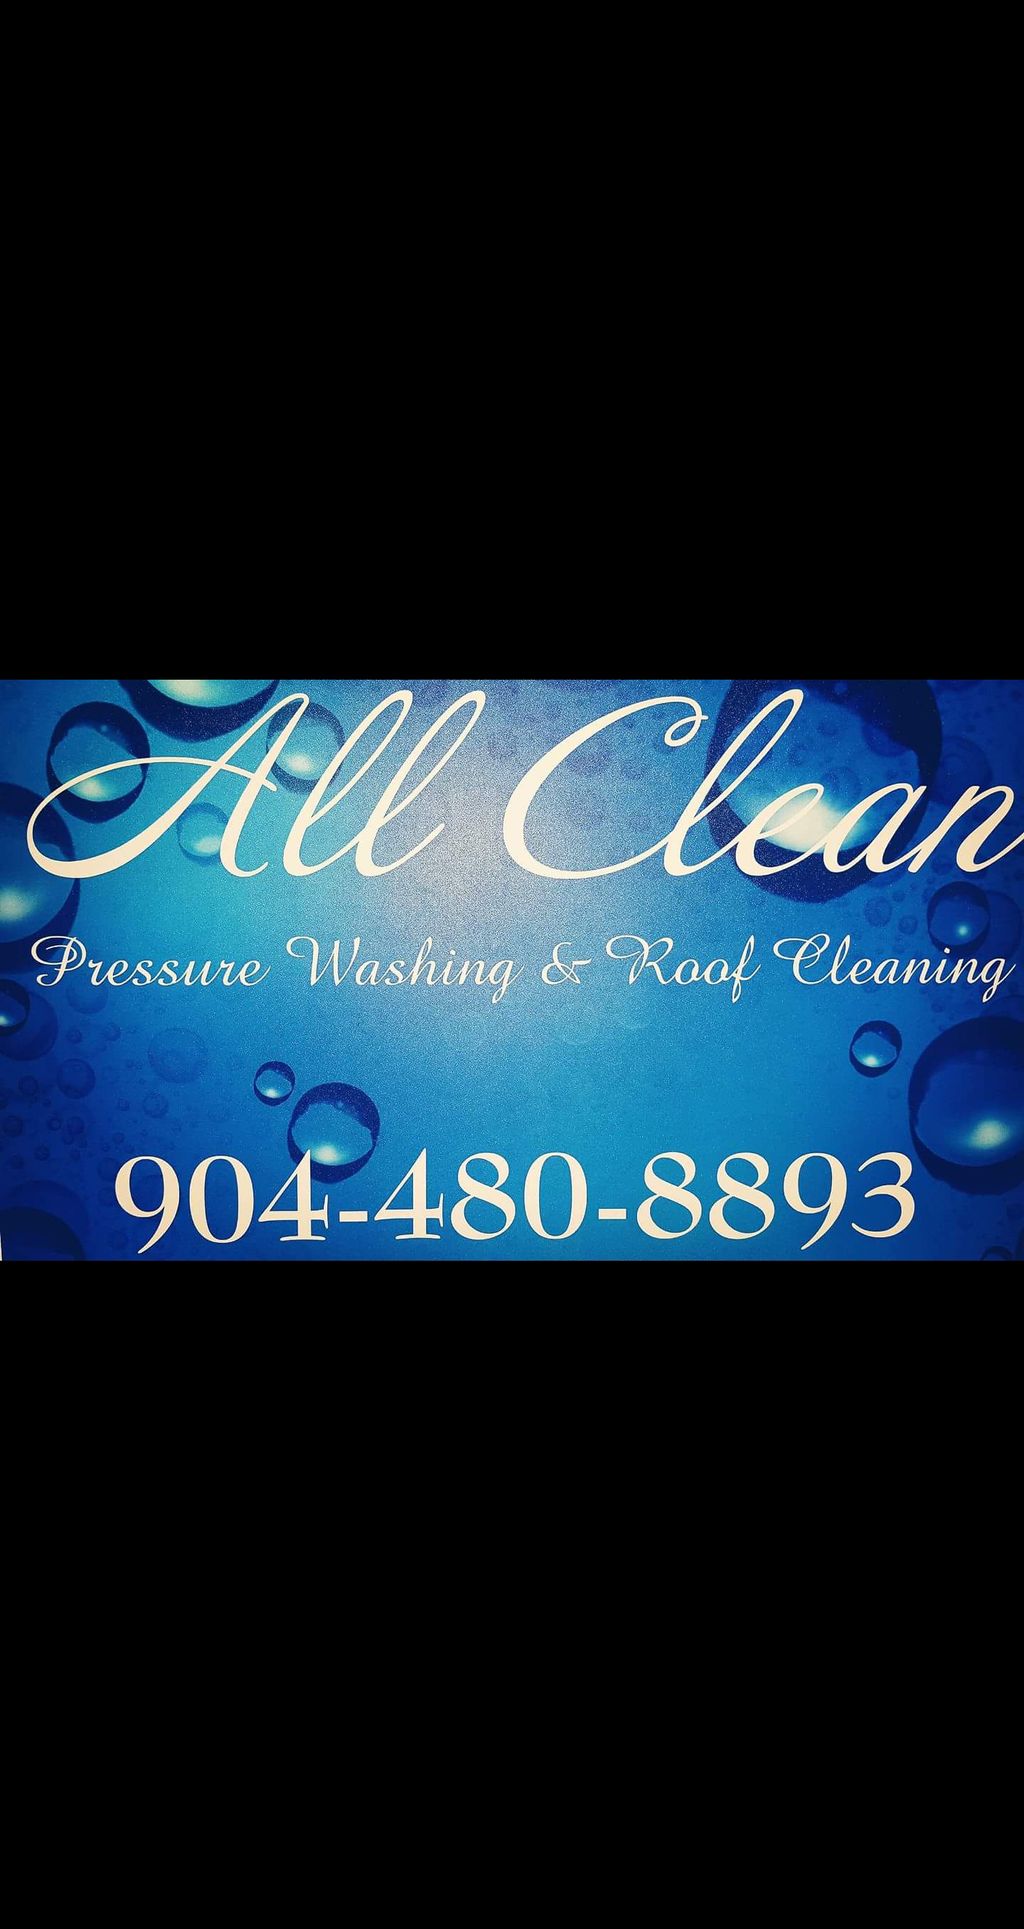 All Clean Pressure Washing & Roof Cleaning